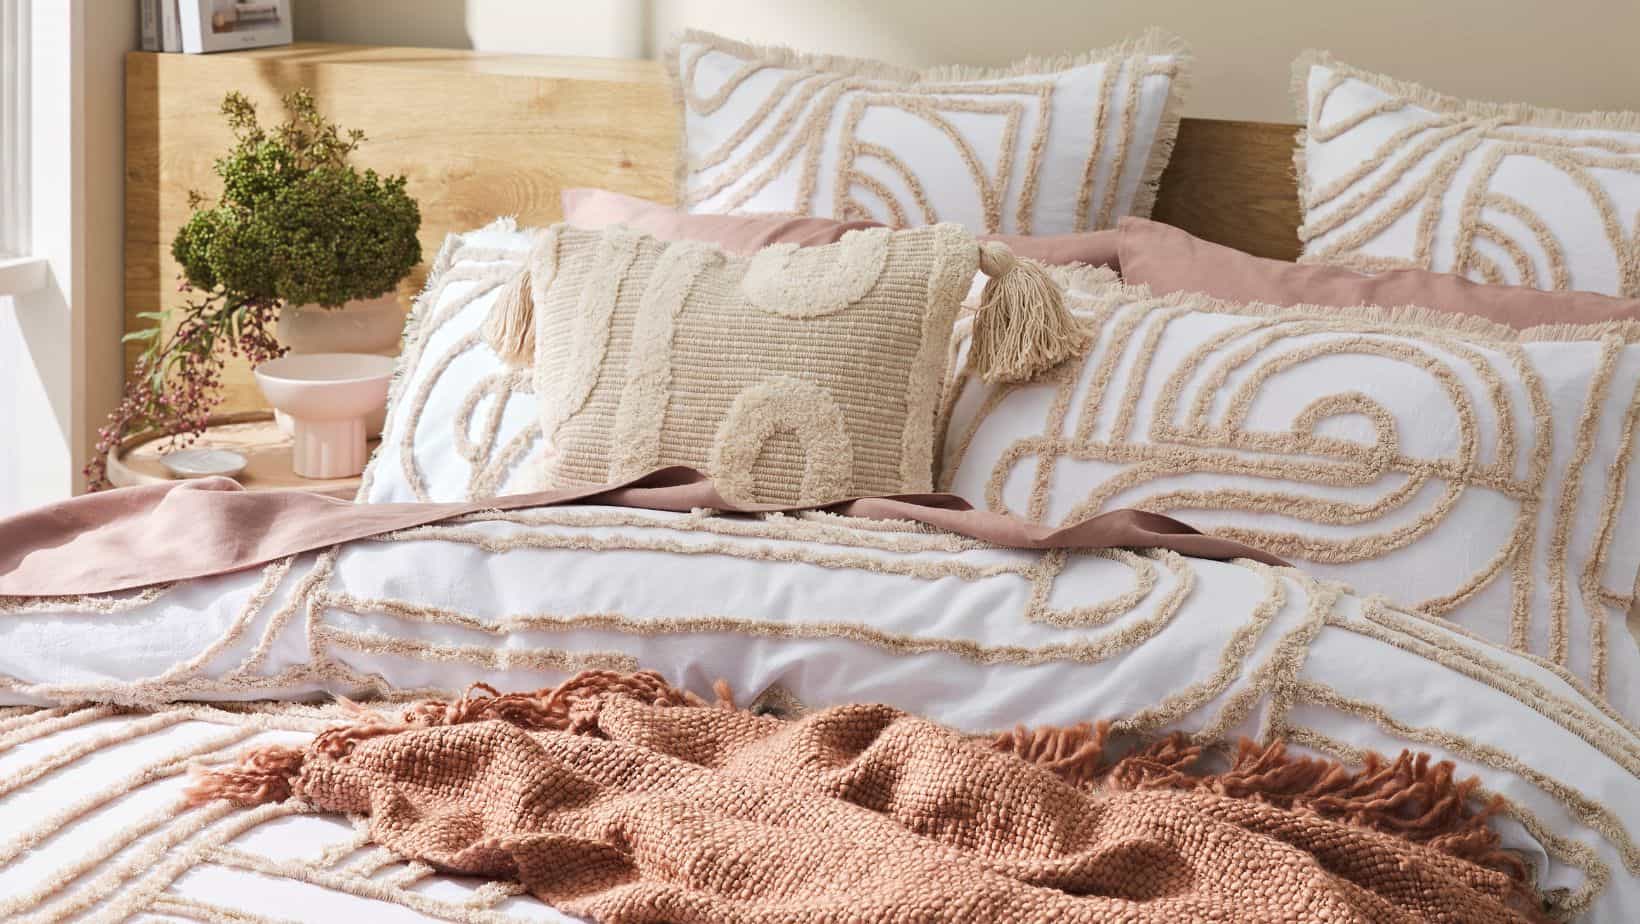 Bed Bath 'N Table - 25% OFF Full Priced Quilt Covers, Bedspreads, & Blankets